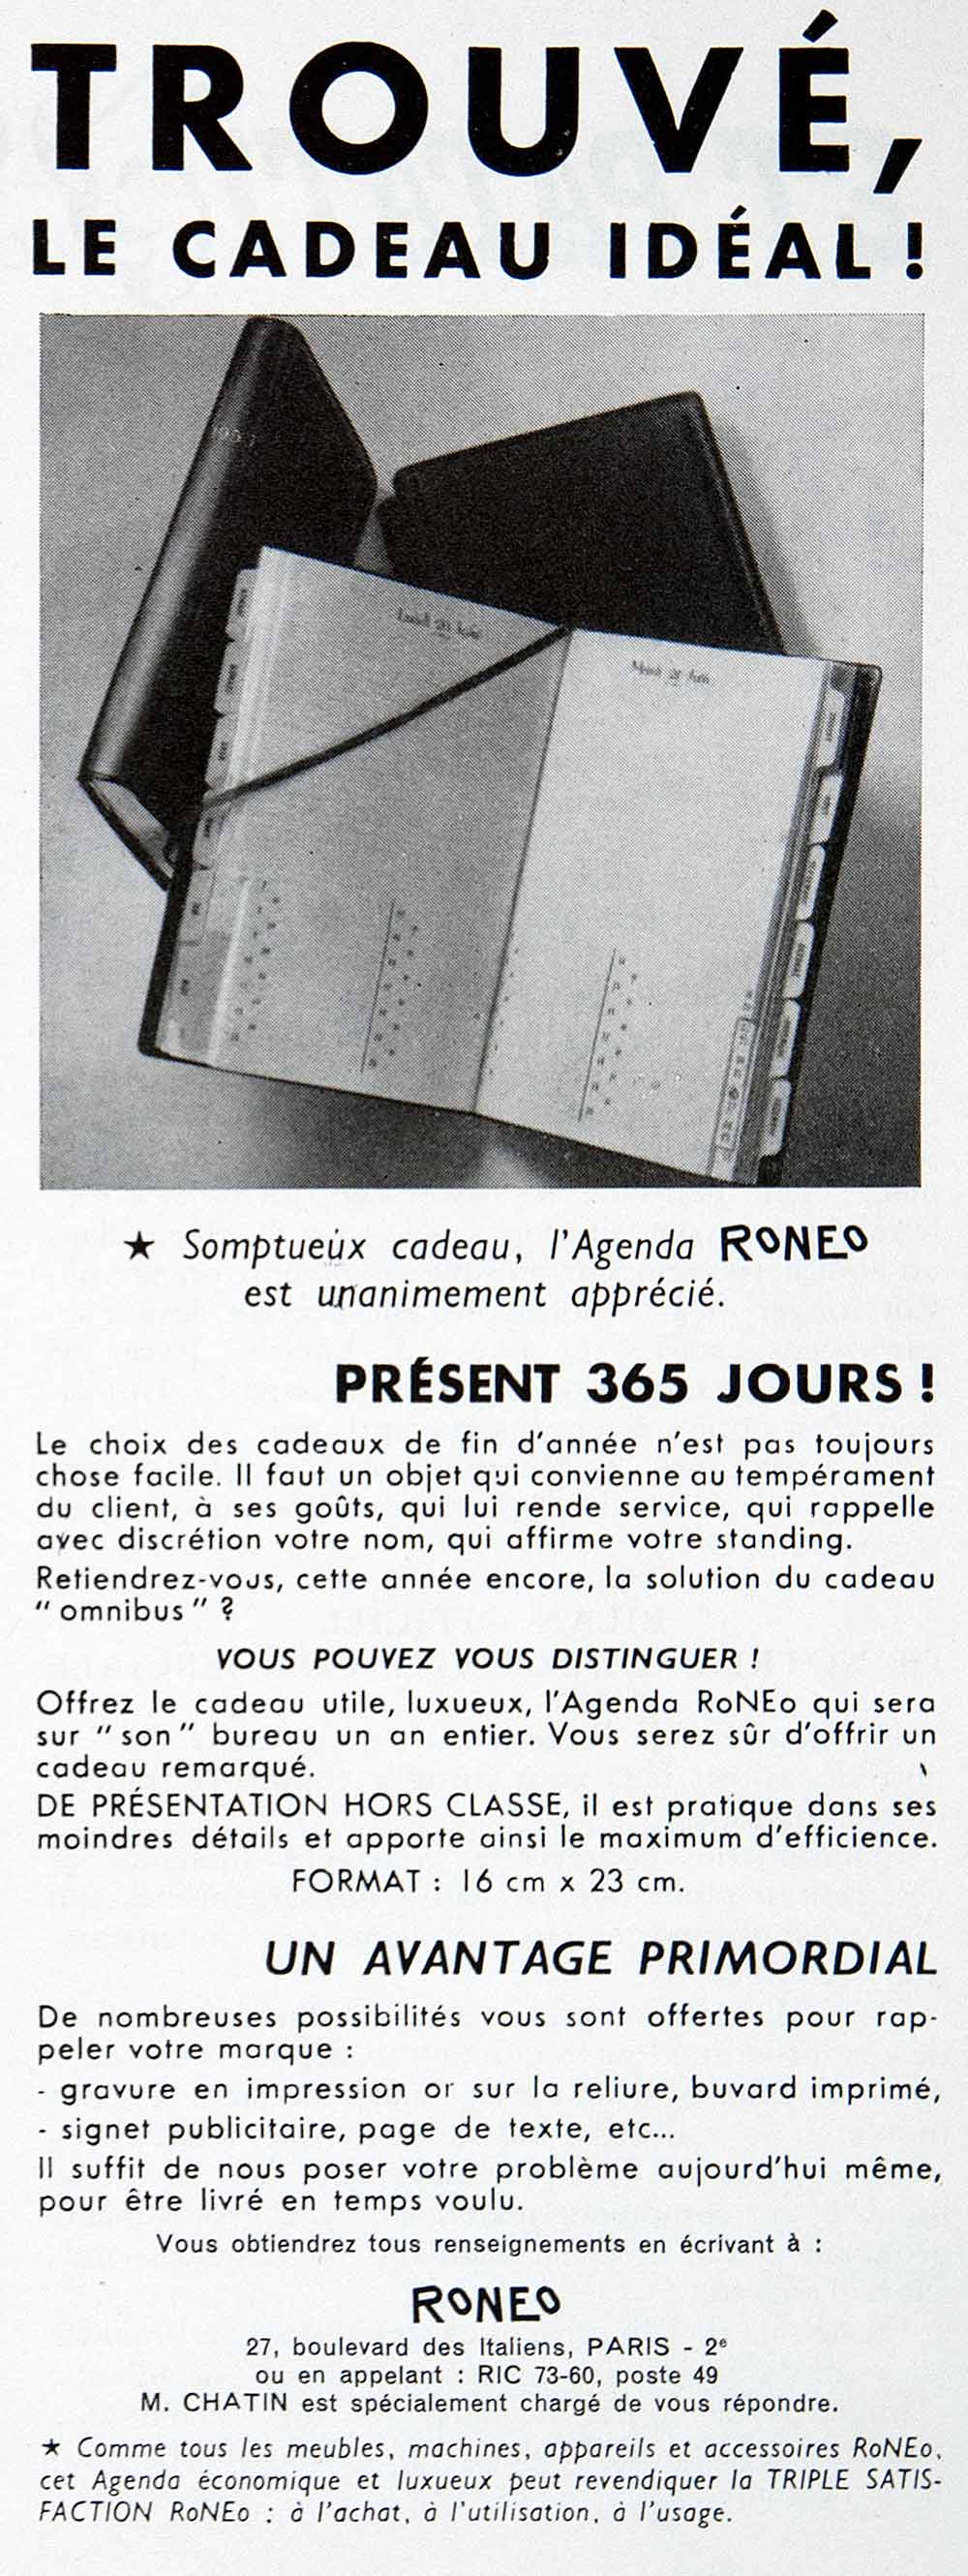 1955 Ad Trouve Roneo Planner Paris France French Advertising Advertisement VEN2